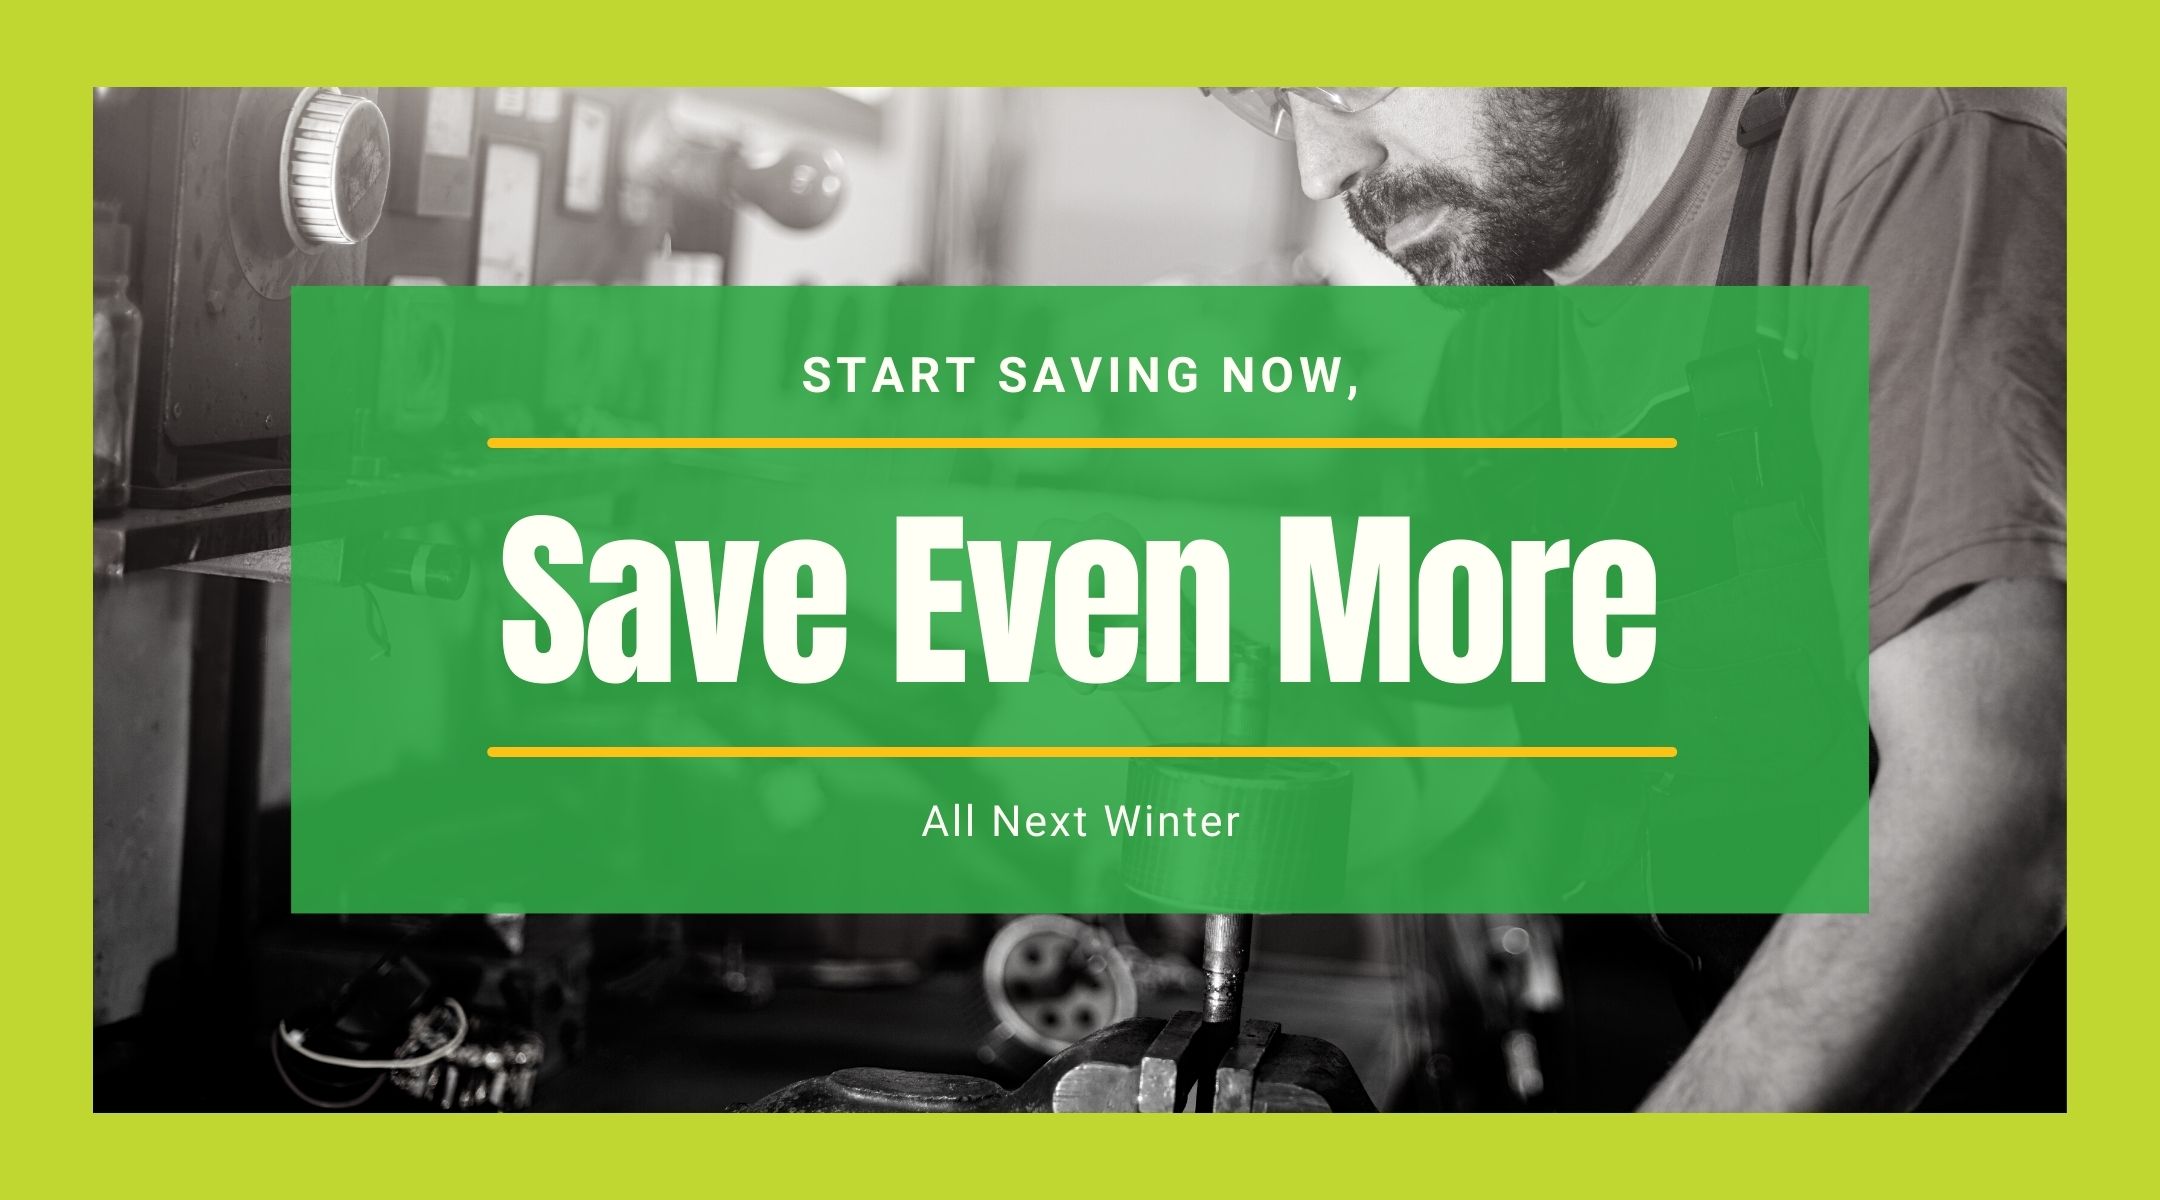 Start Saving Now, Save Even More All Next Winter